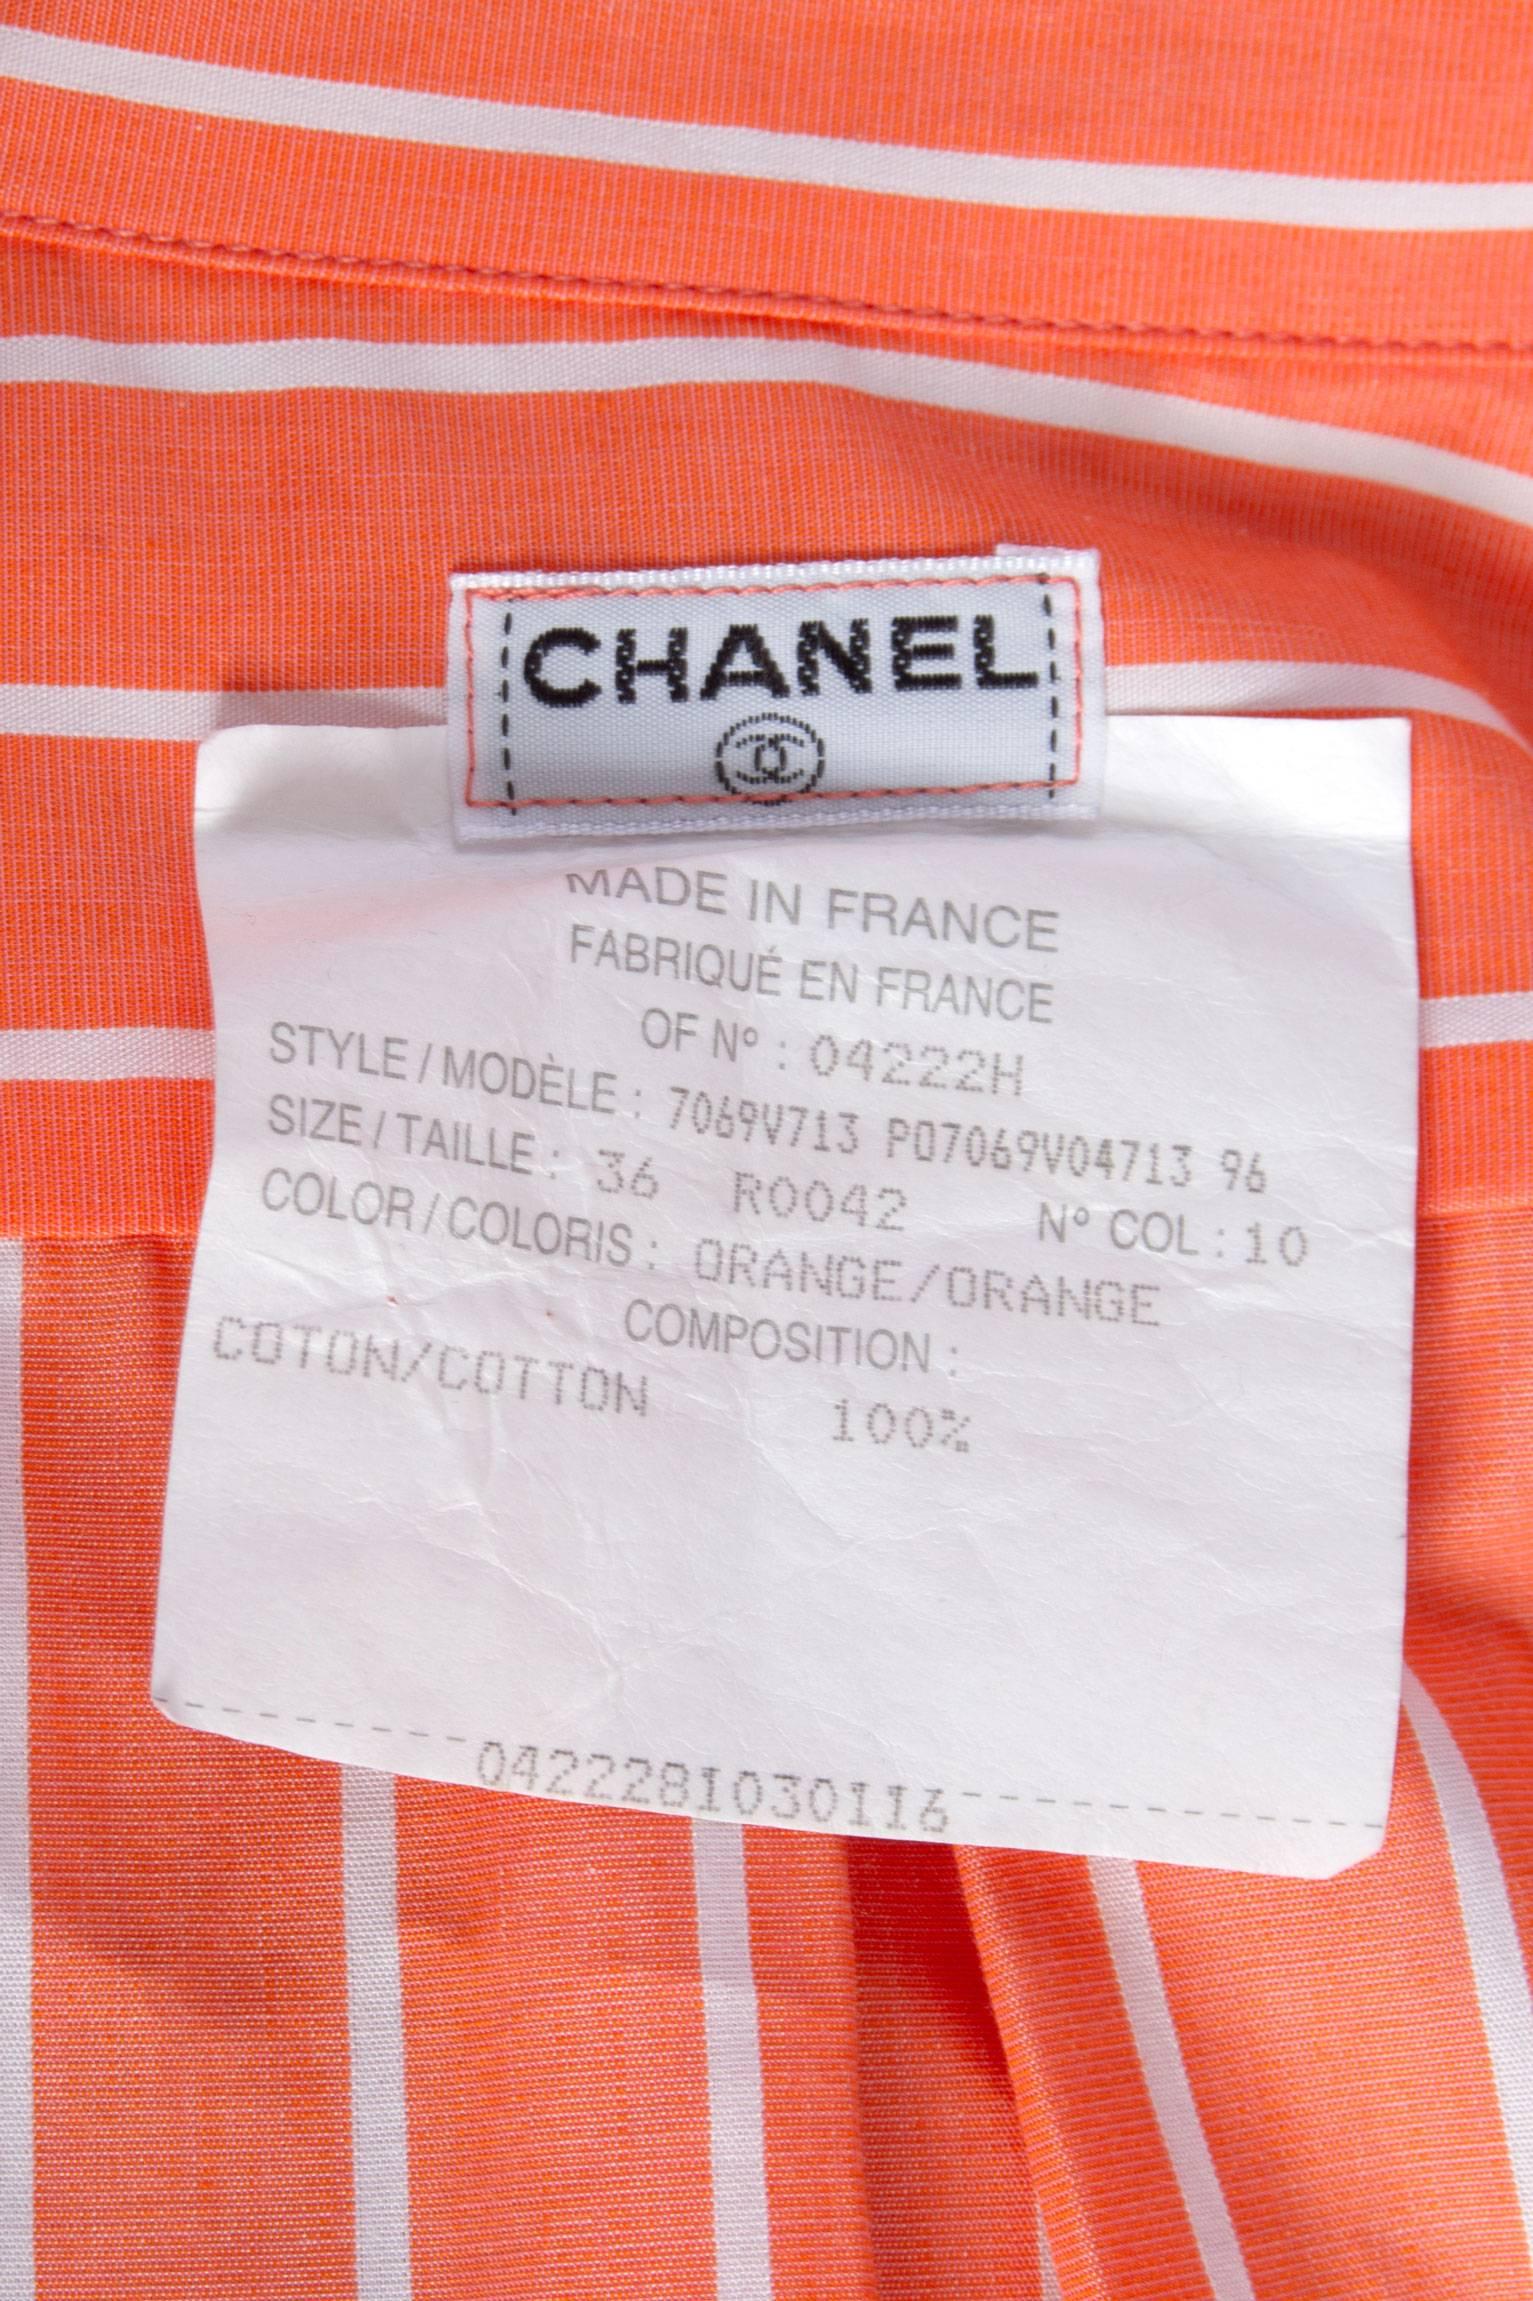 A lovely 1980s tangerine Chanel cotton pajamas with white vertical stripes. The ensemble consist of a loose fitted shirt and a pair of shorts. The shirt has one buttoned cuffs, two breast pockets with a one buttoned flap closure and closes down the